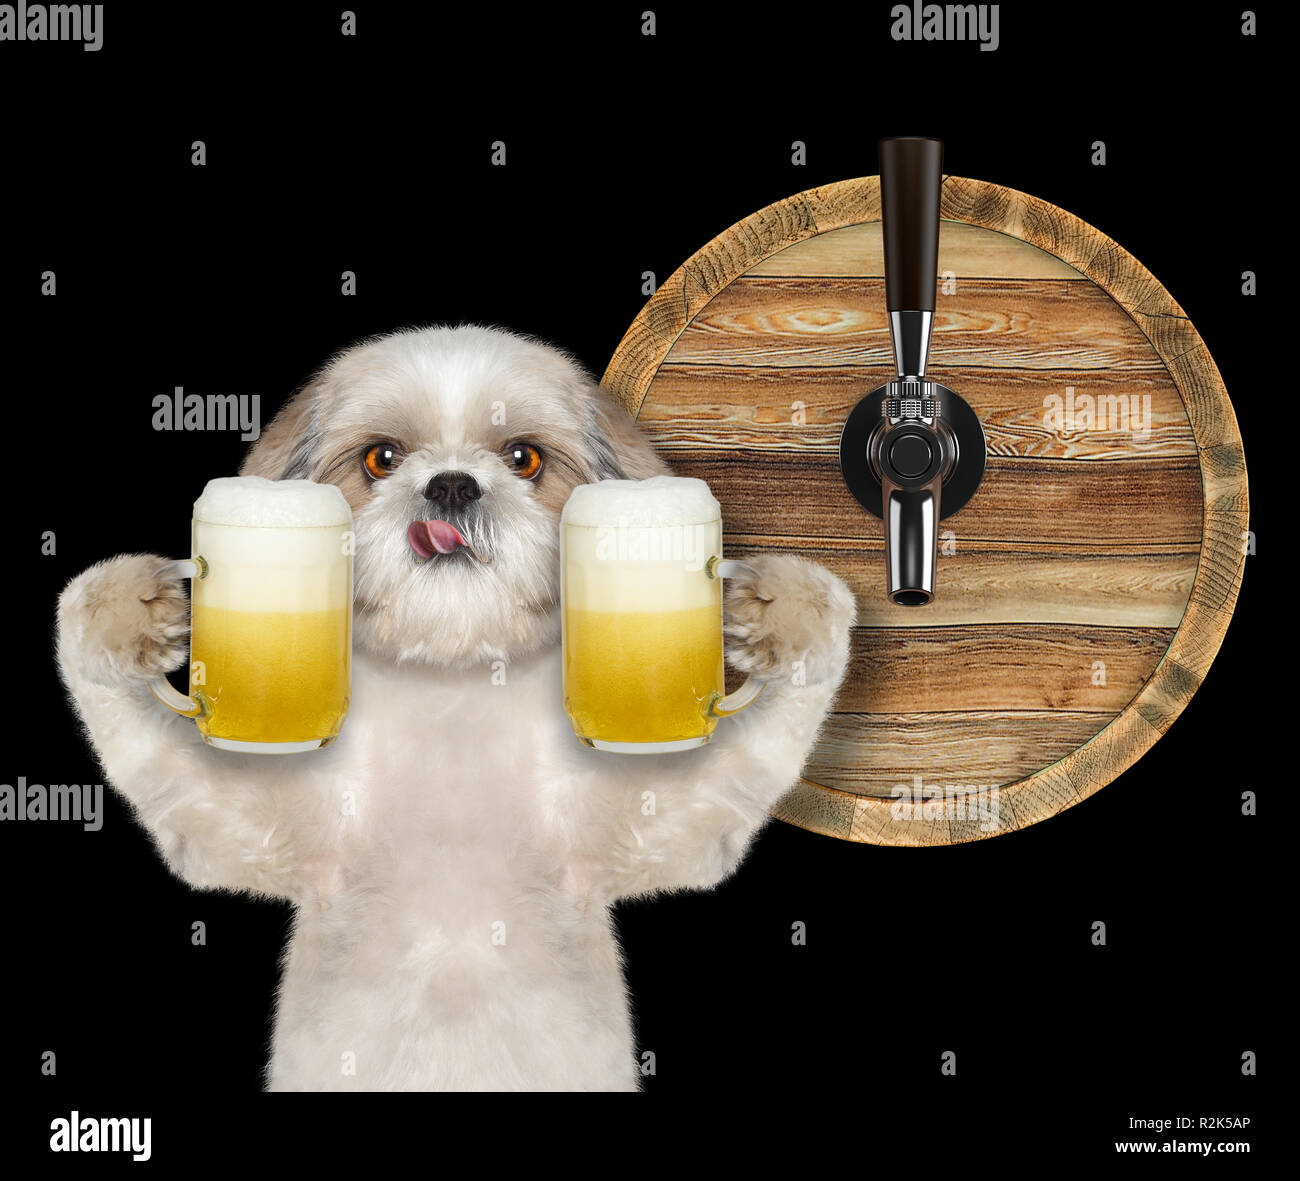 Cute shitzu dog with a glass of beer and barrel. isolated on black Stock Photo